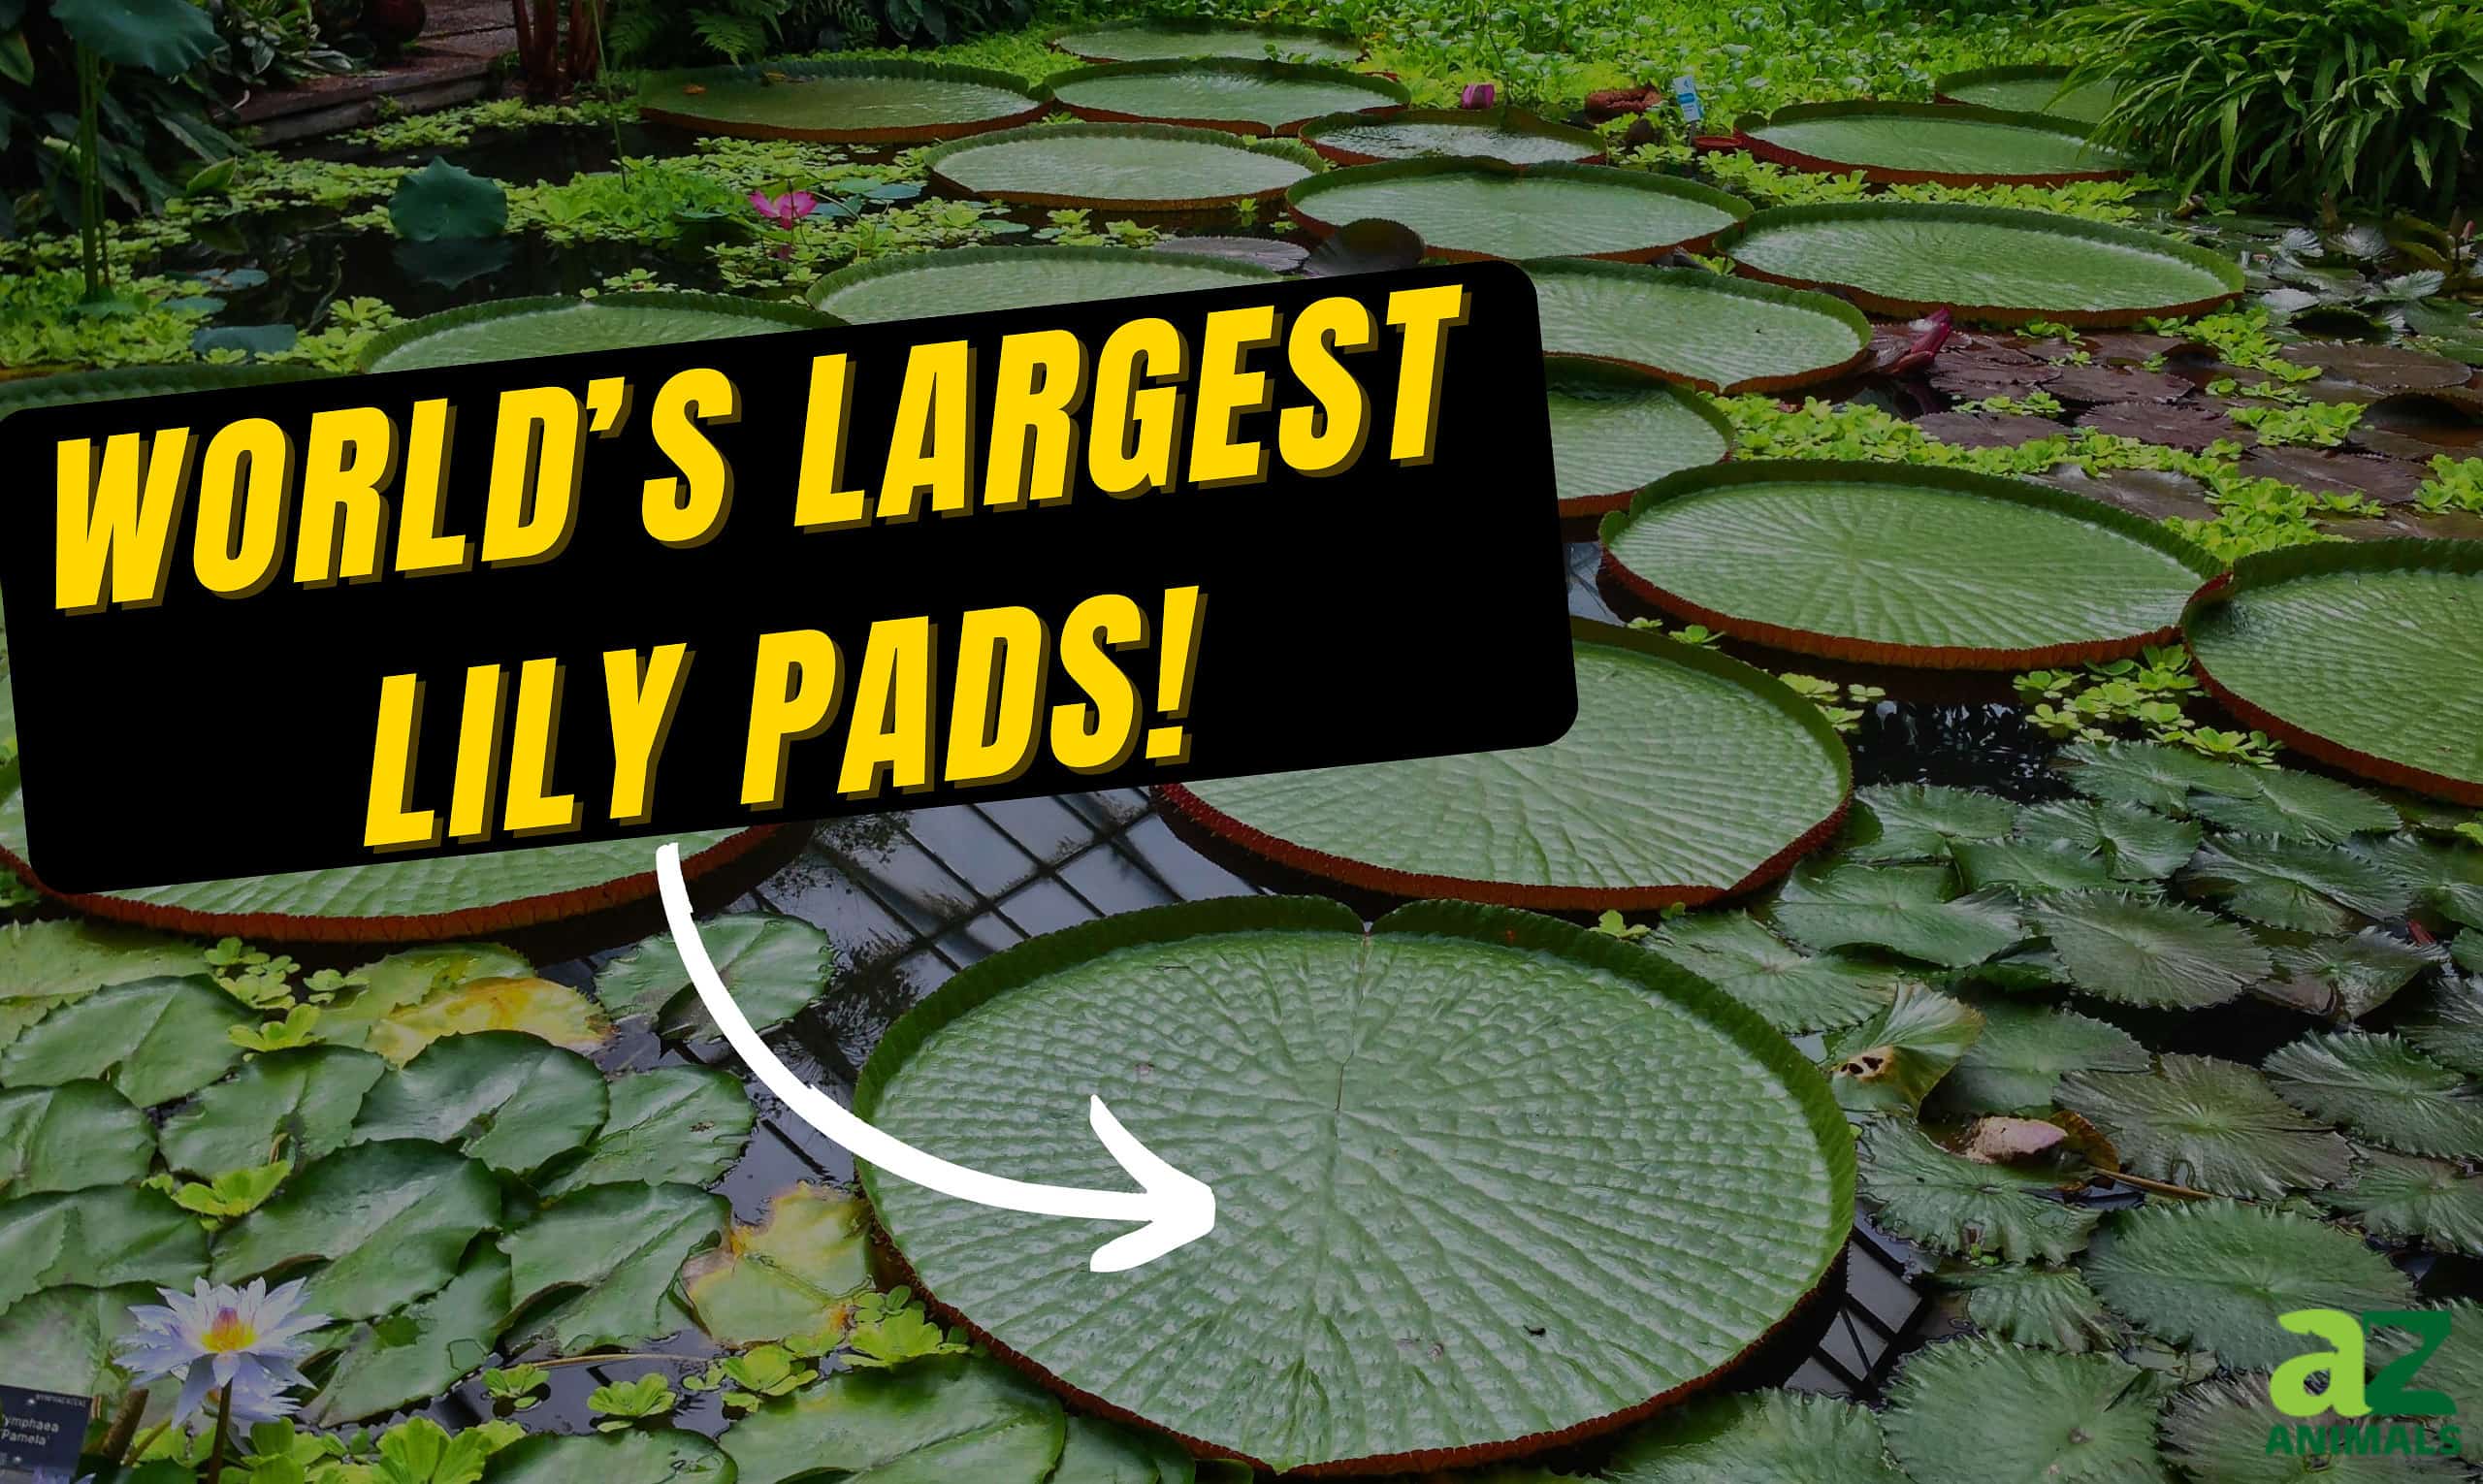 Largest Lily Pads